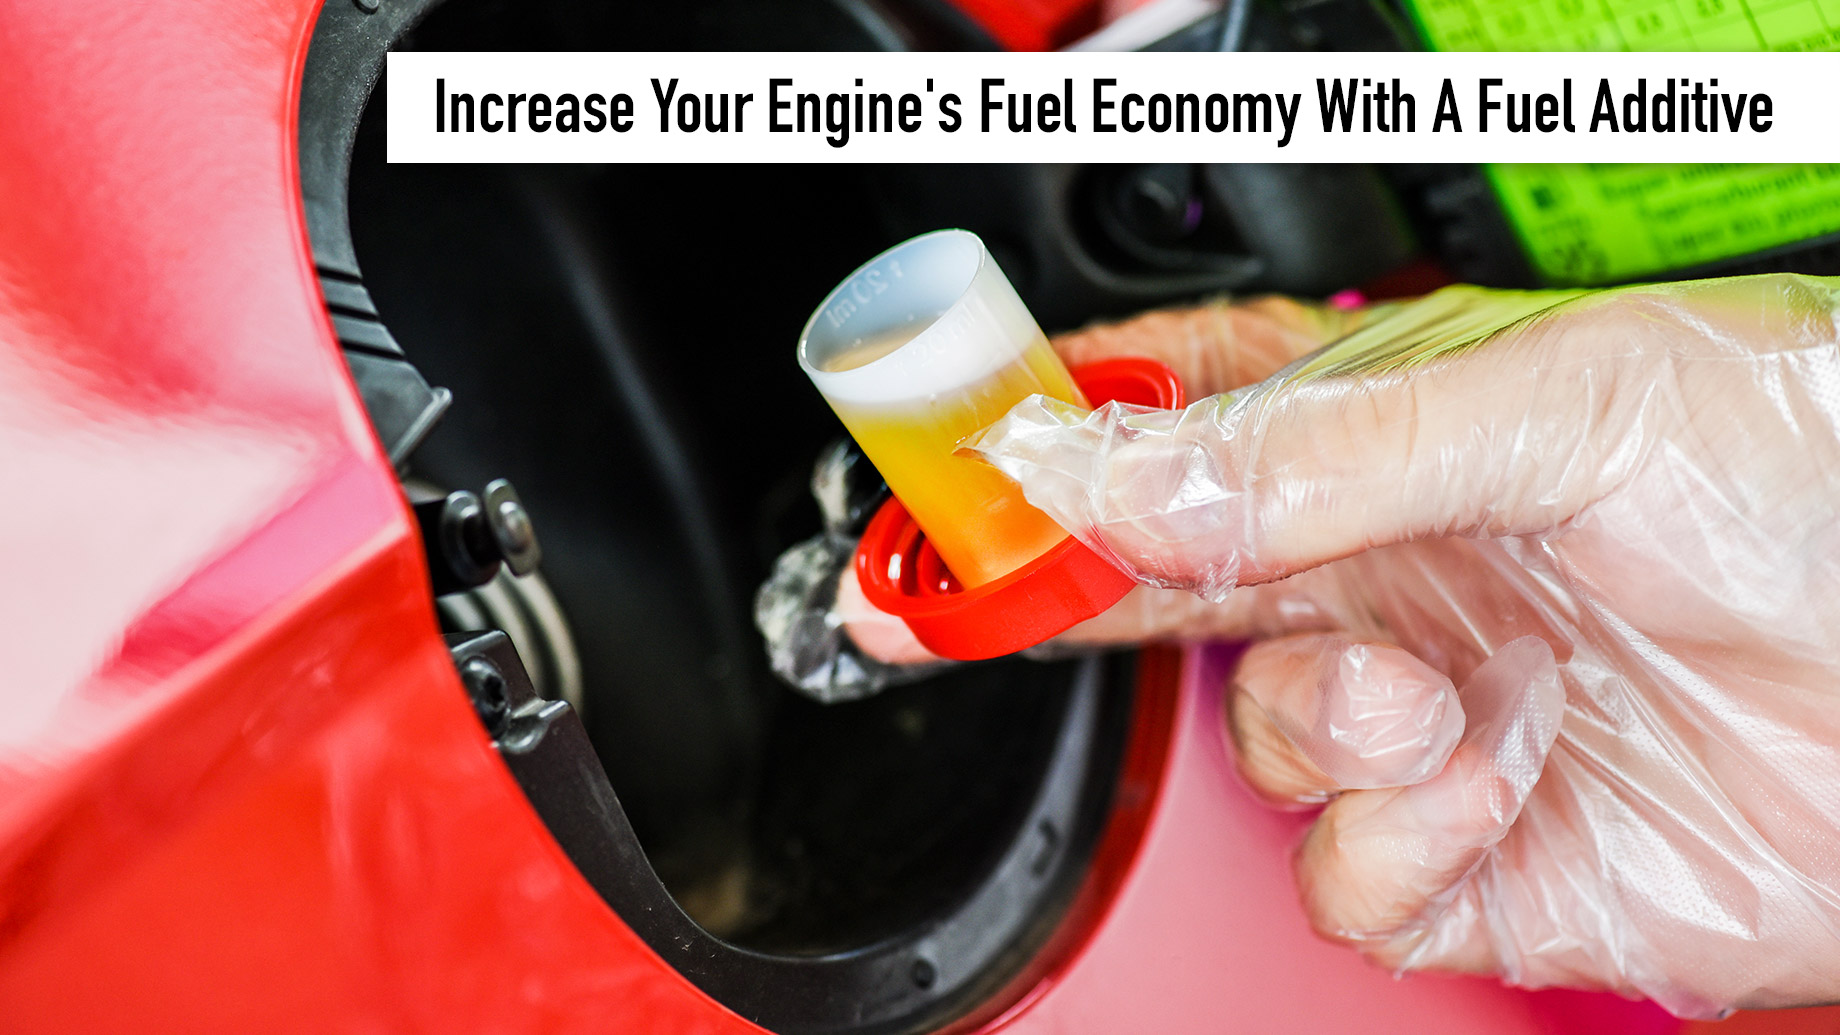 Increase Your Engine's Fuel Economy With A Fuel Additive